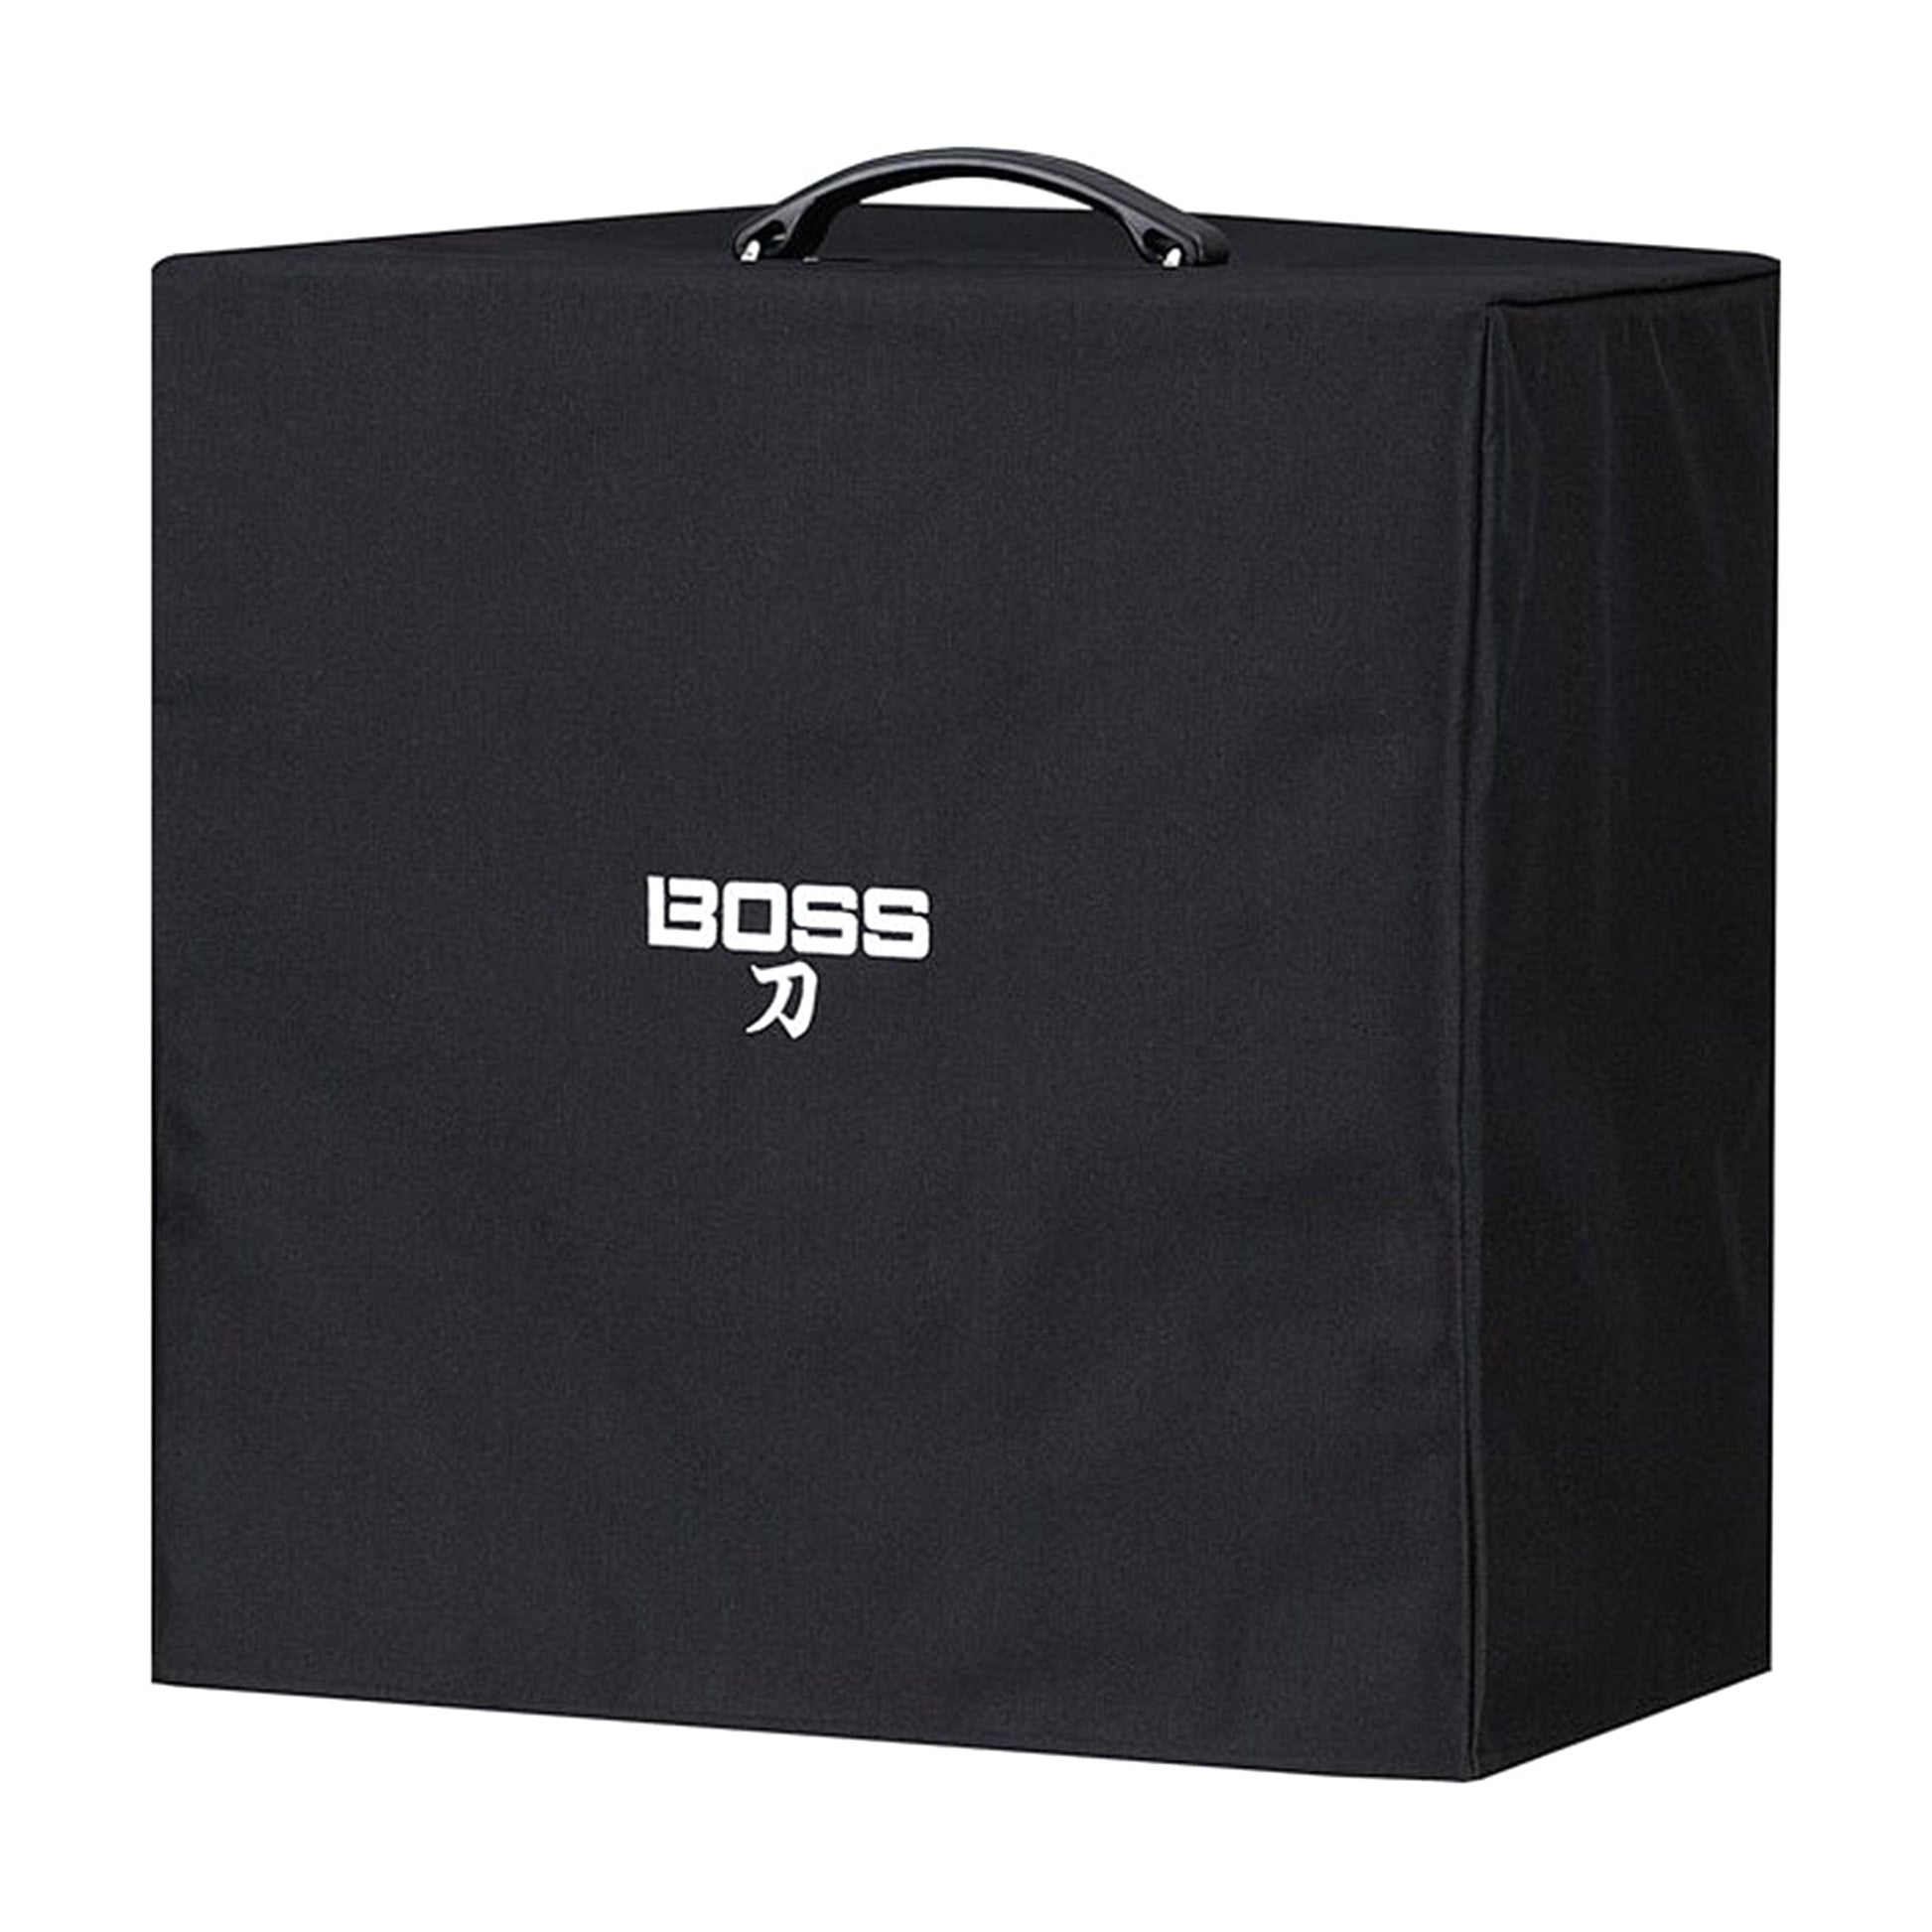 Boss Amp Cover for KTN-110B Accessories / Amp Covers